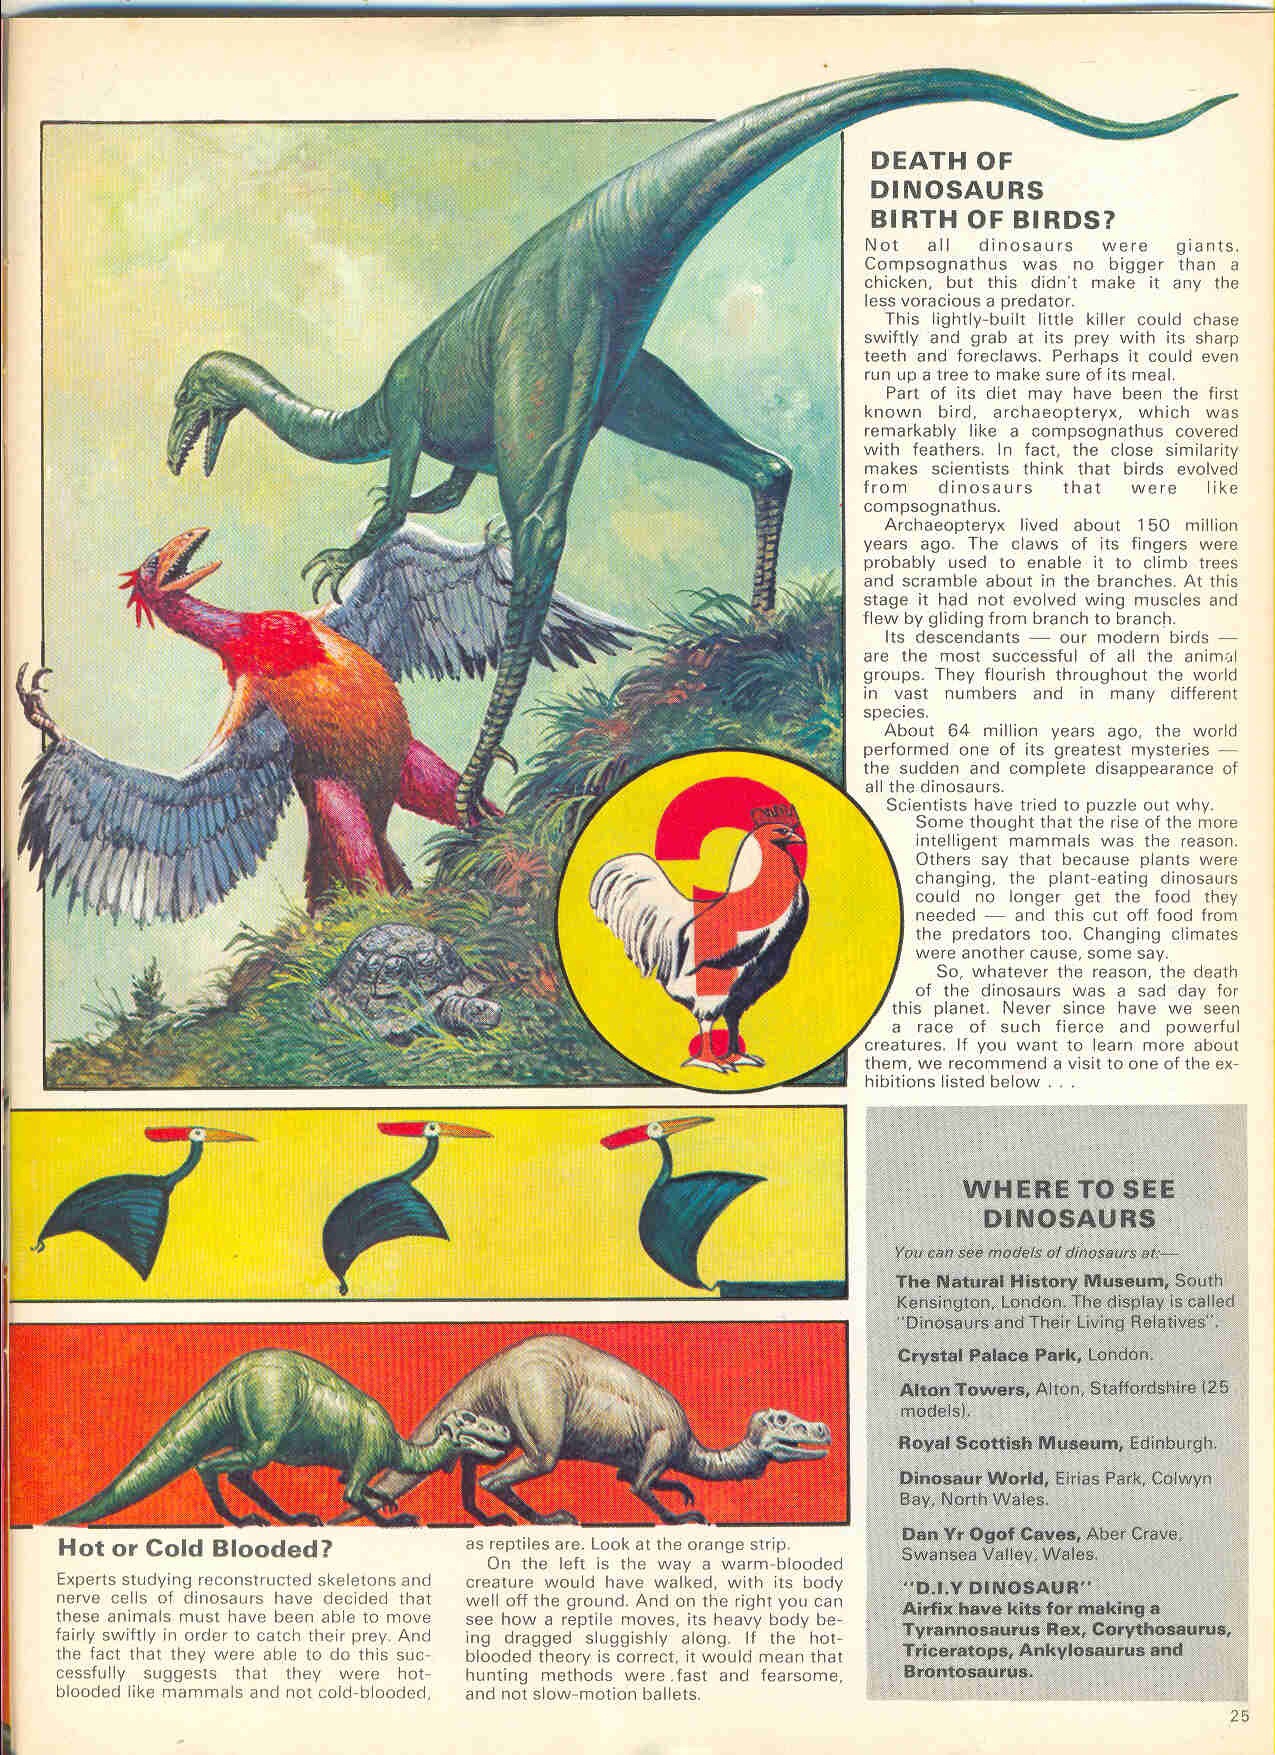 Look Alive Issue One - I, Dinosaur by Don Lawrence and Gillian Wrobel